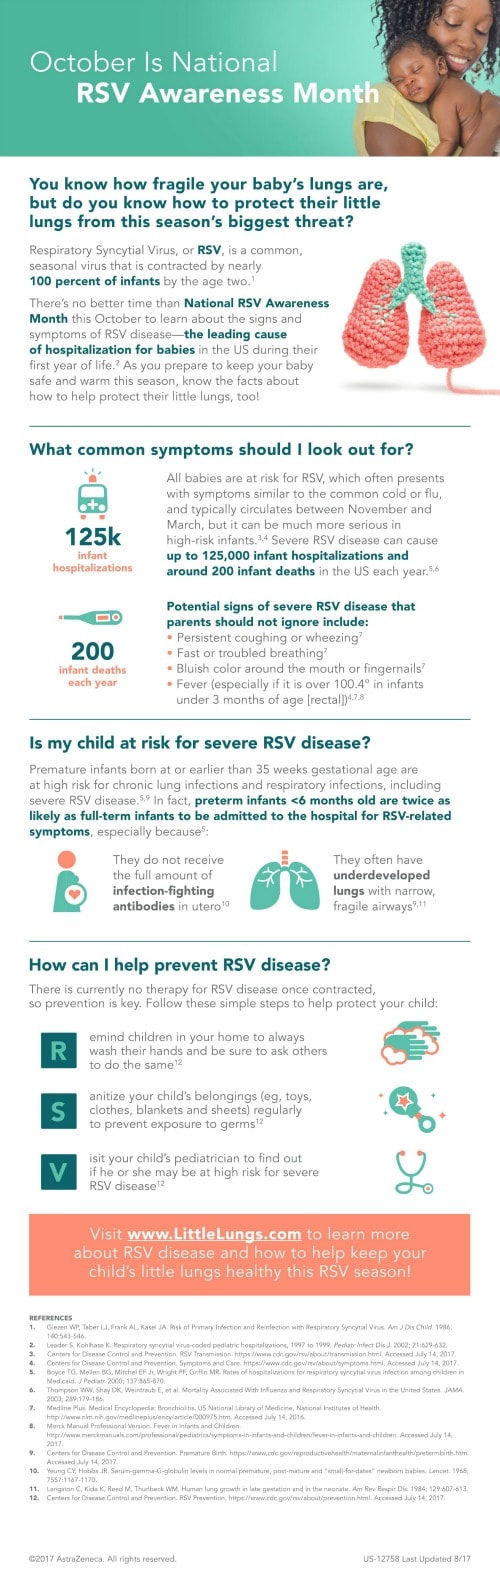 ways to protect your baby from RSV